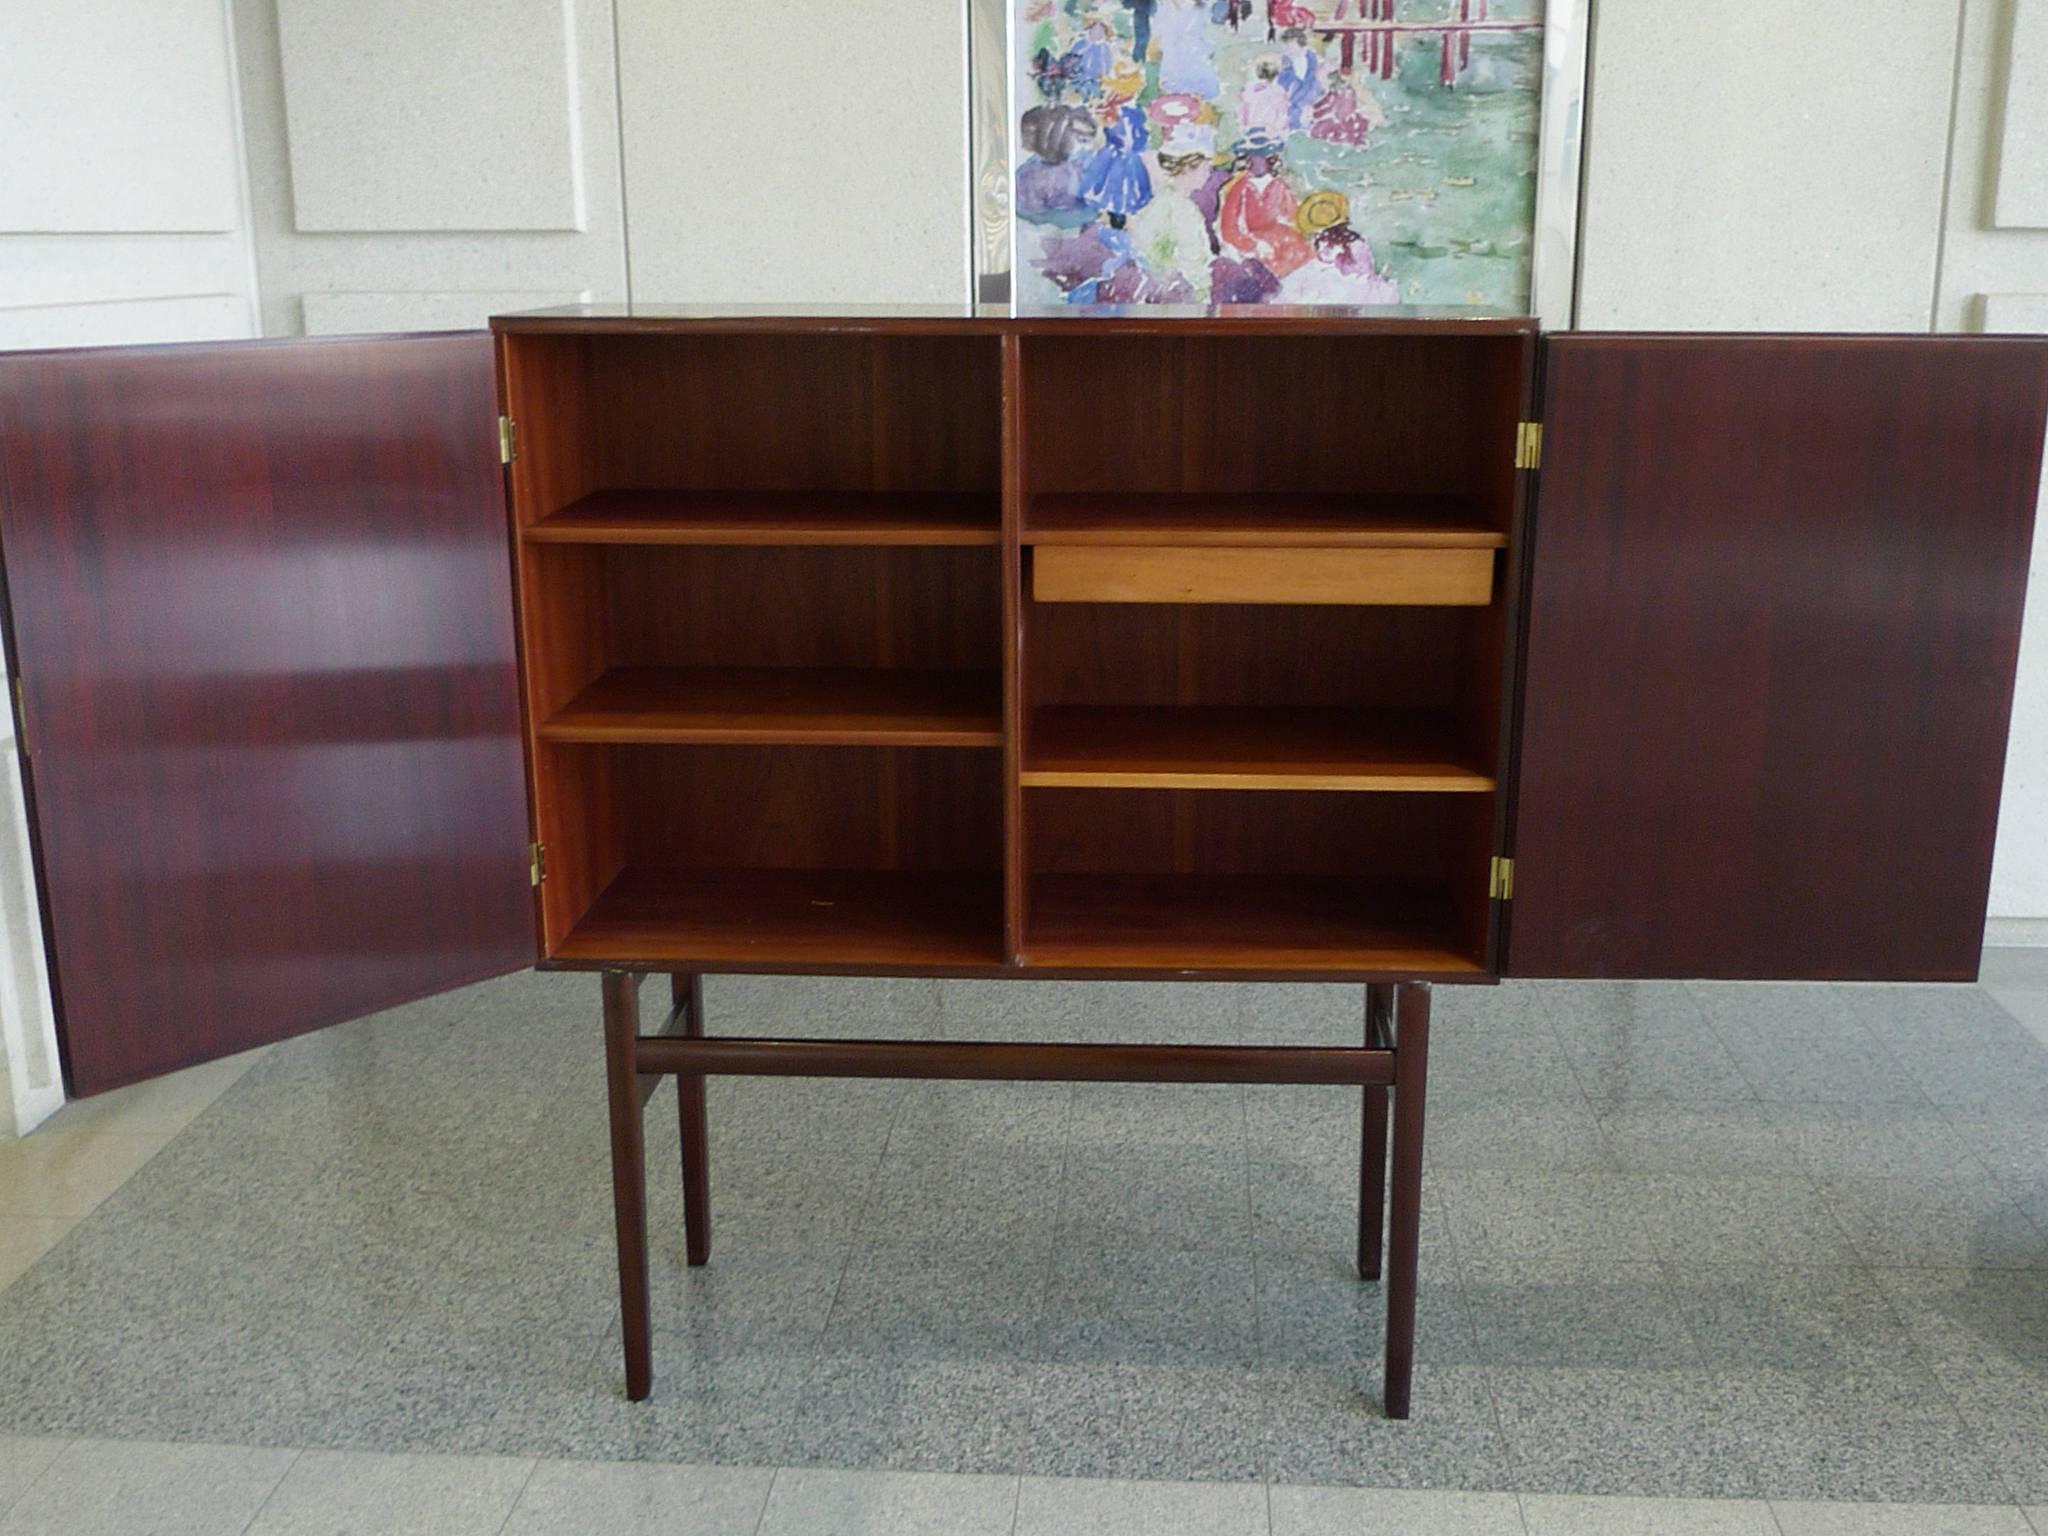 1960s Danish Rungstedlund Mahogany Highboard by Ole Wanscher for Poul Jeppesen For Sale 1